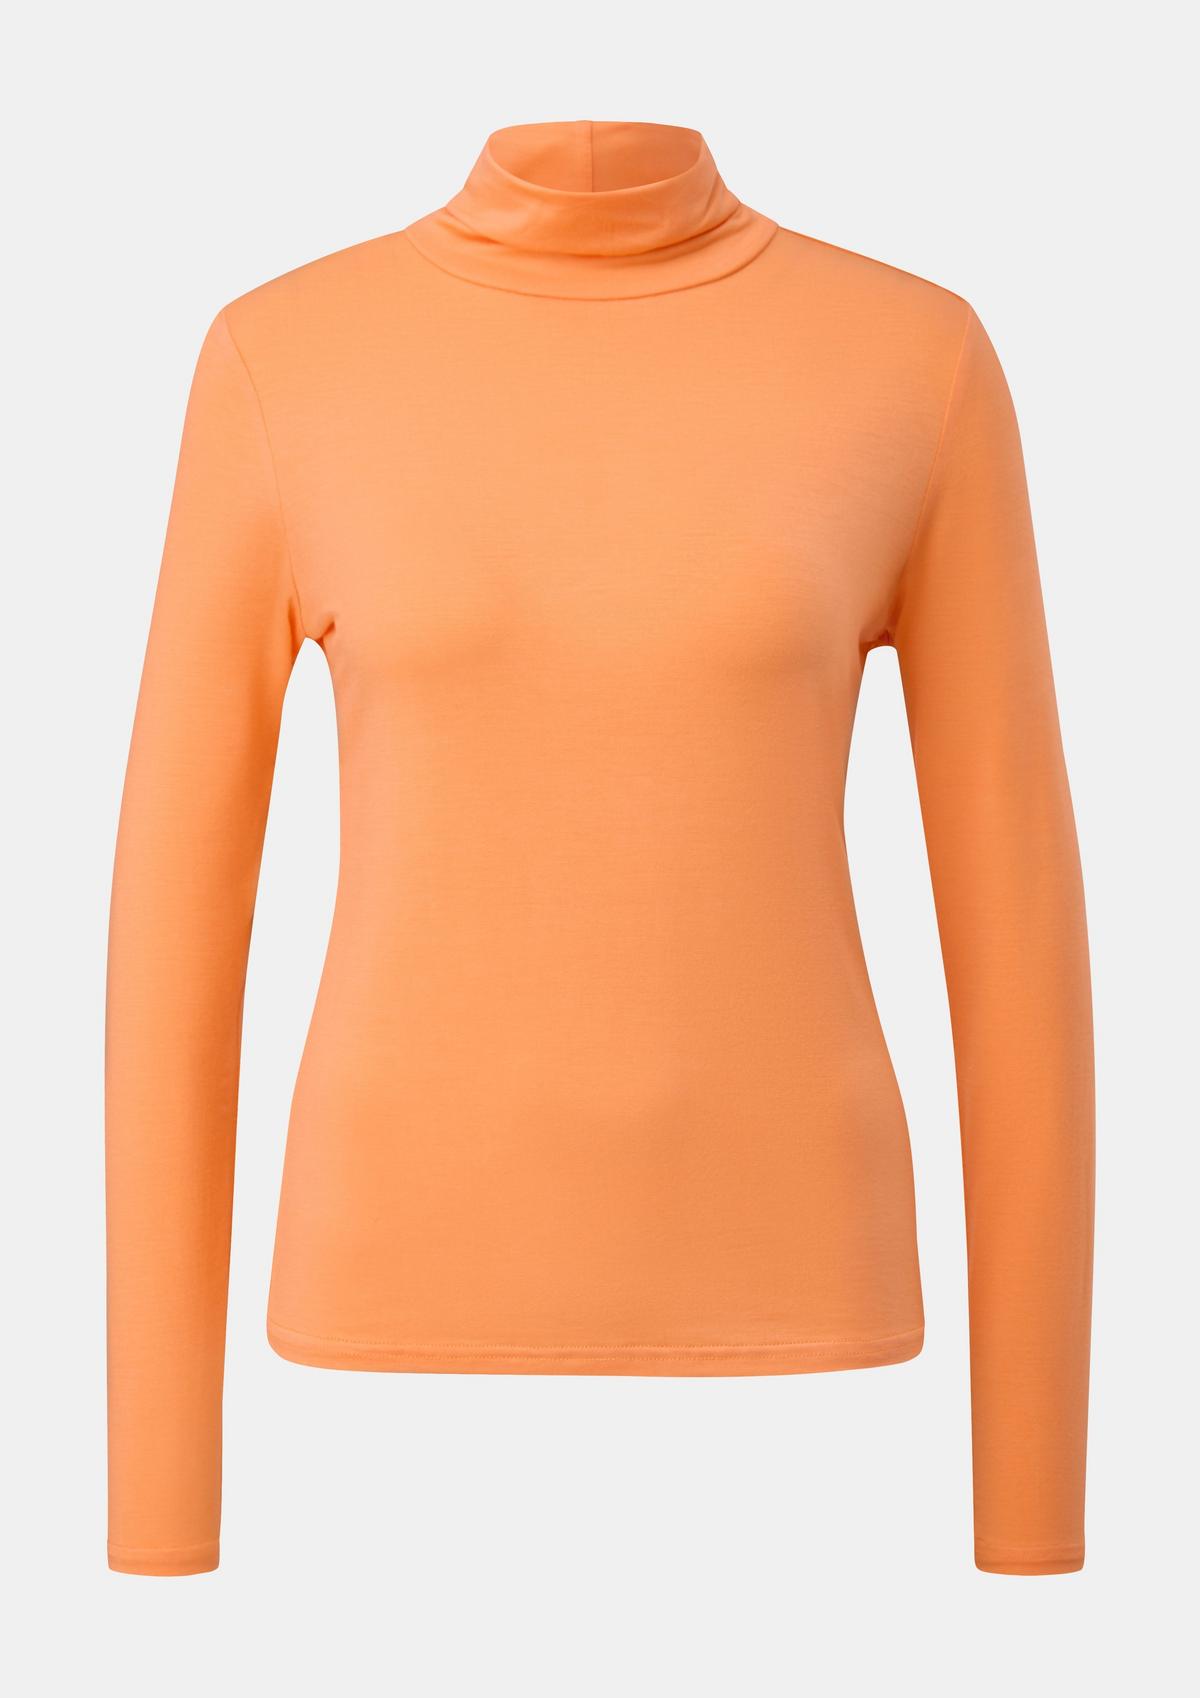 comma Turtleneck top made of soft modal